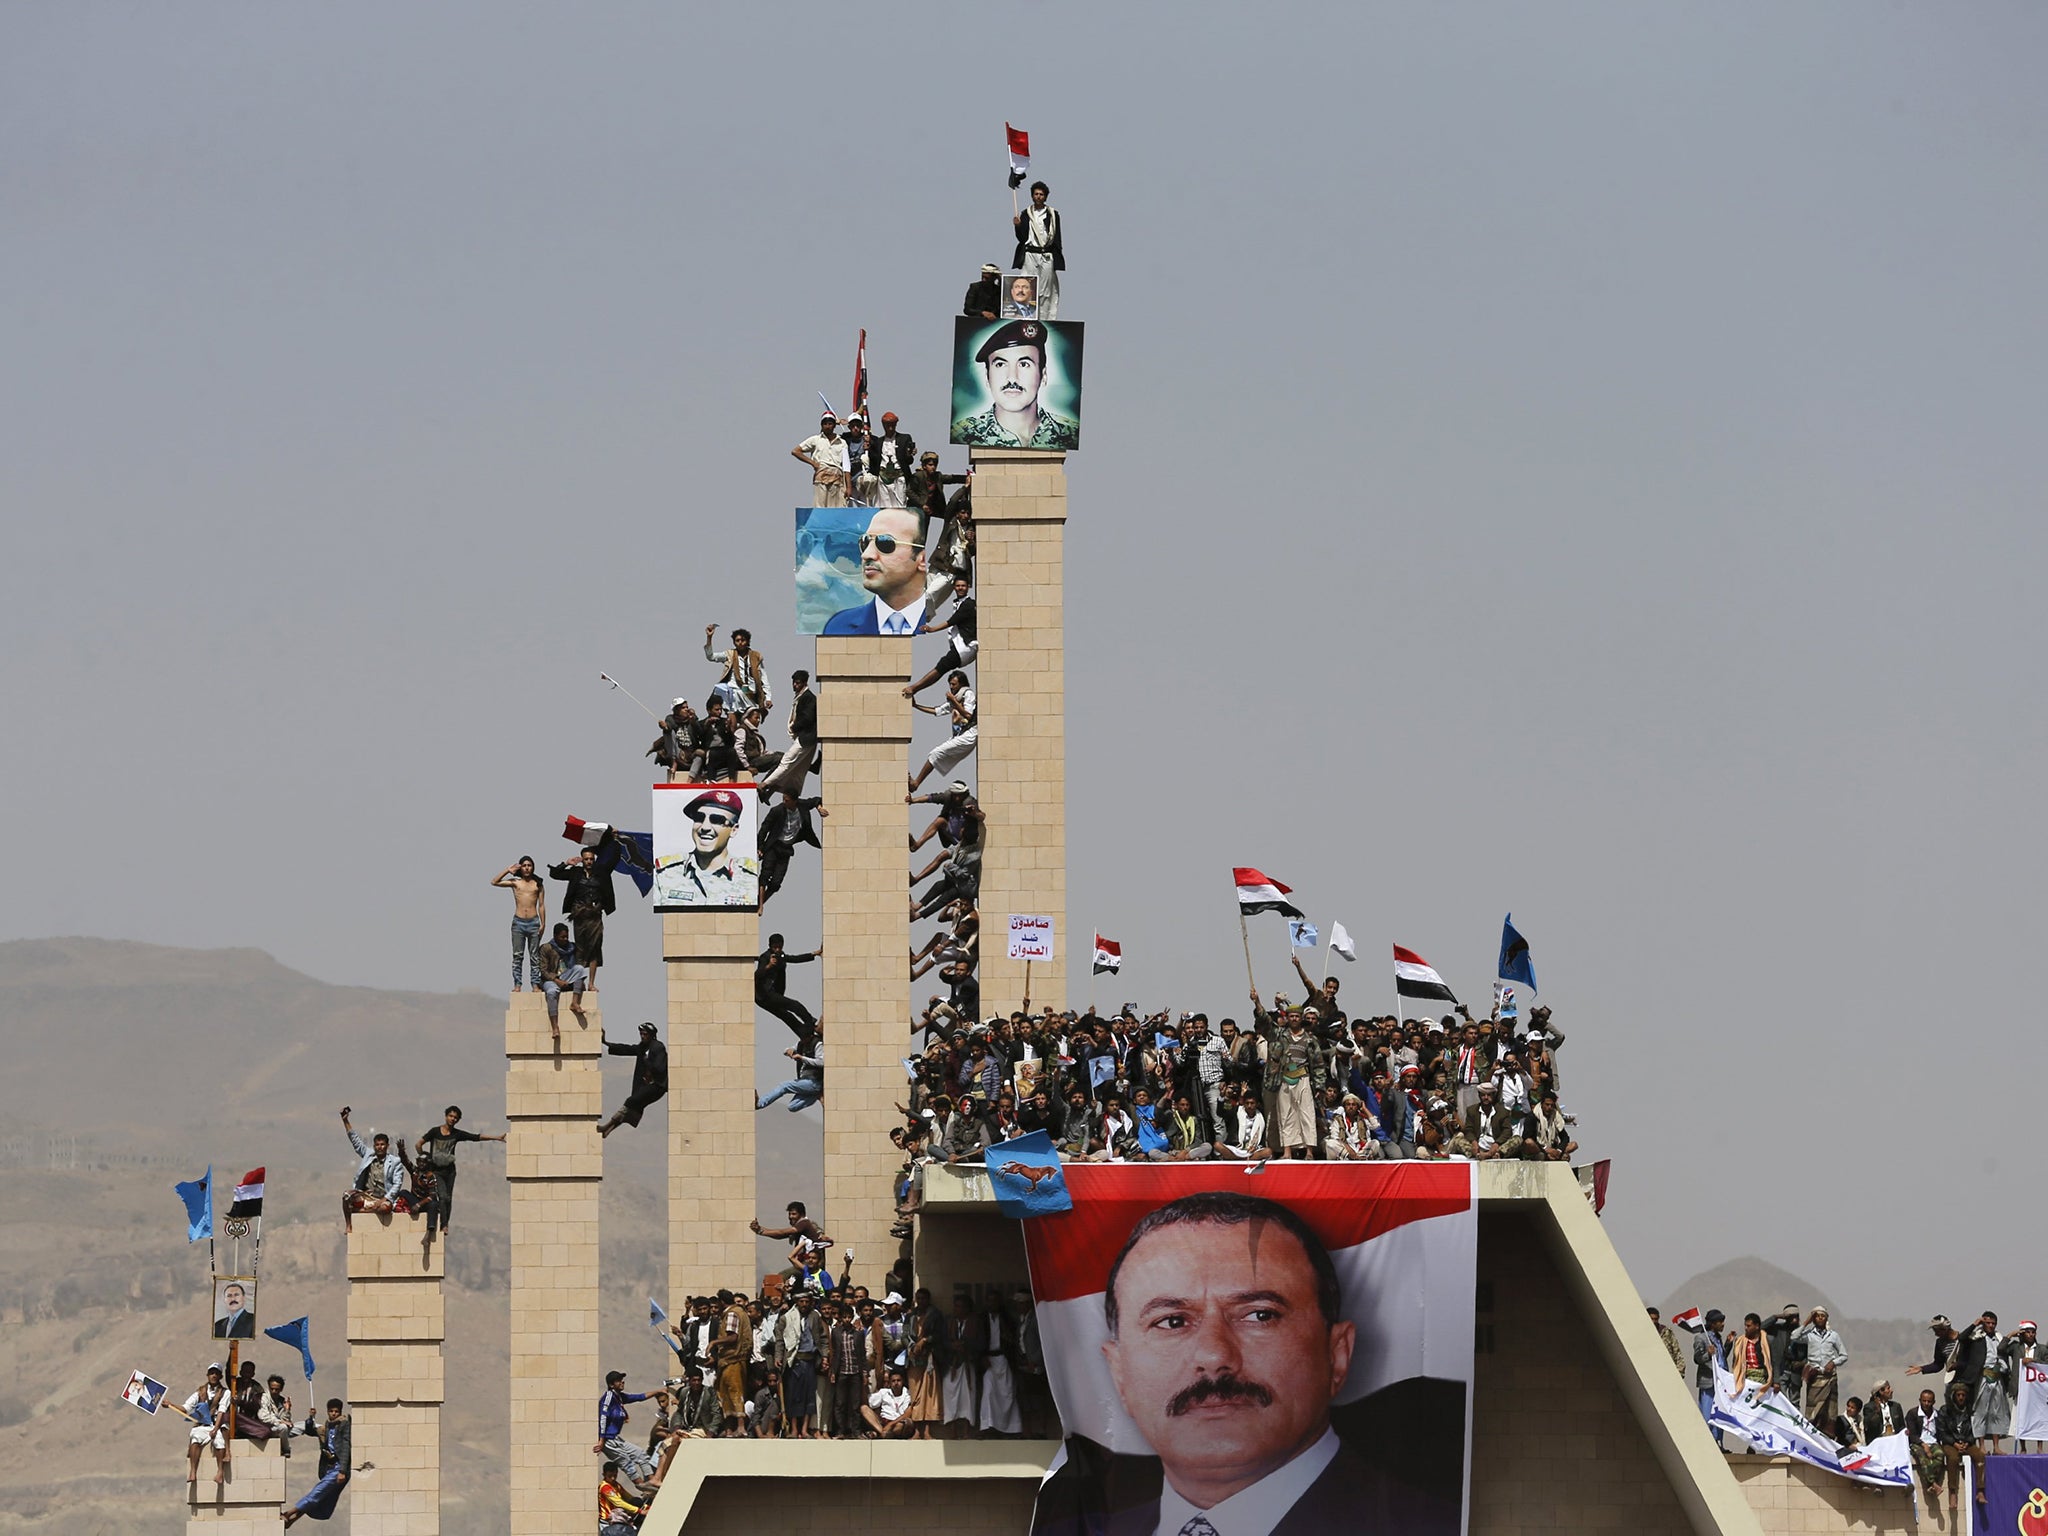 Supporters of Yemen's former President Ali Abdullah Saleh climb pillars of the Unknown Soldier Monument during a rally marking one year of Saudi-led air strikes in Yemen's capital Sanaa